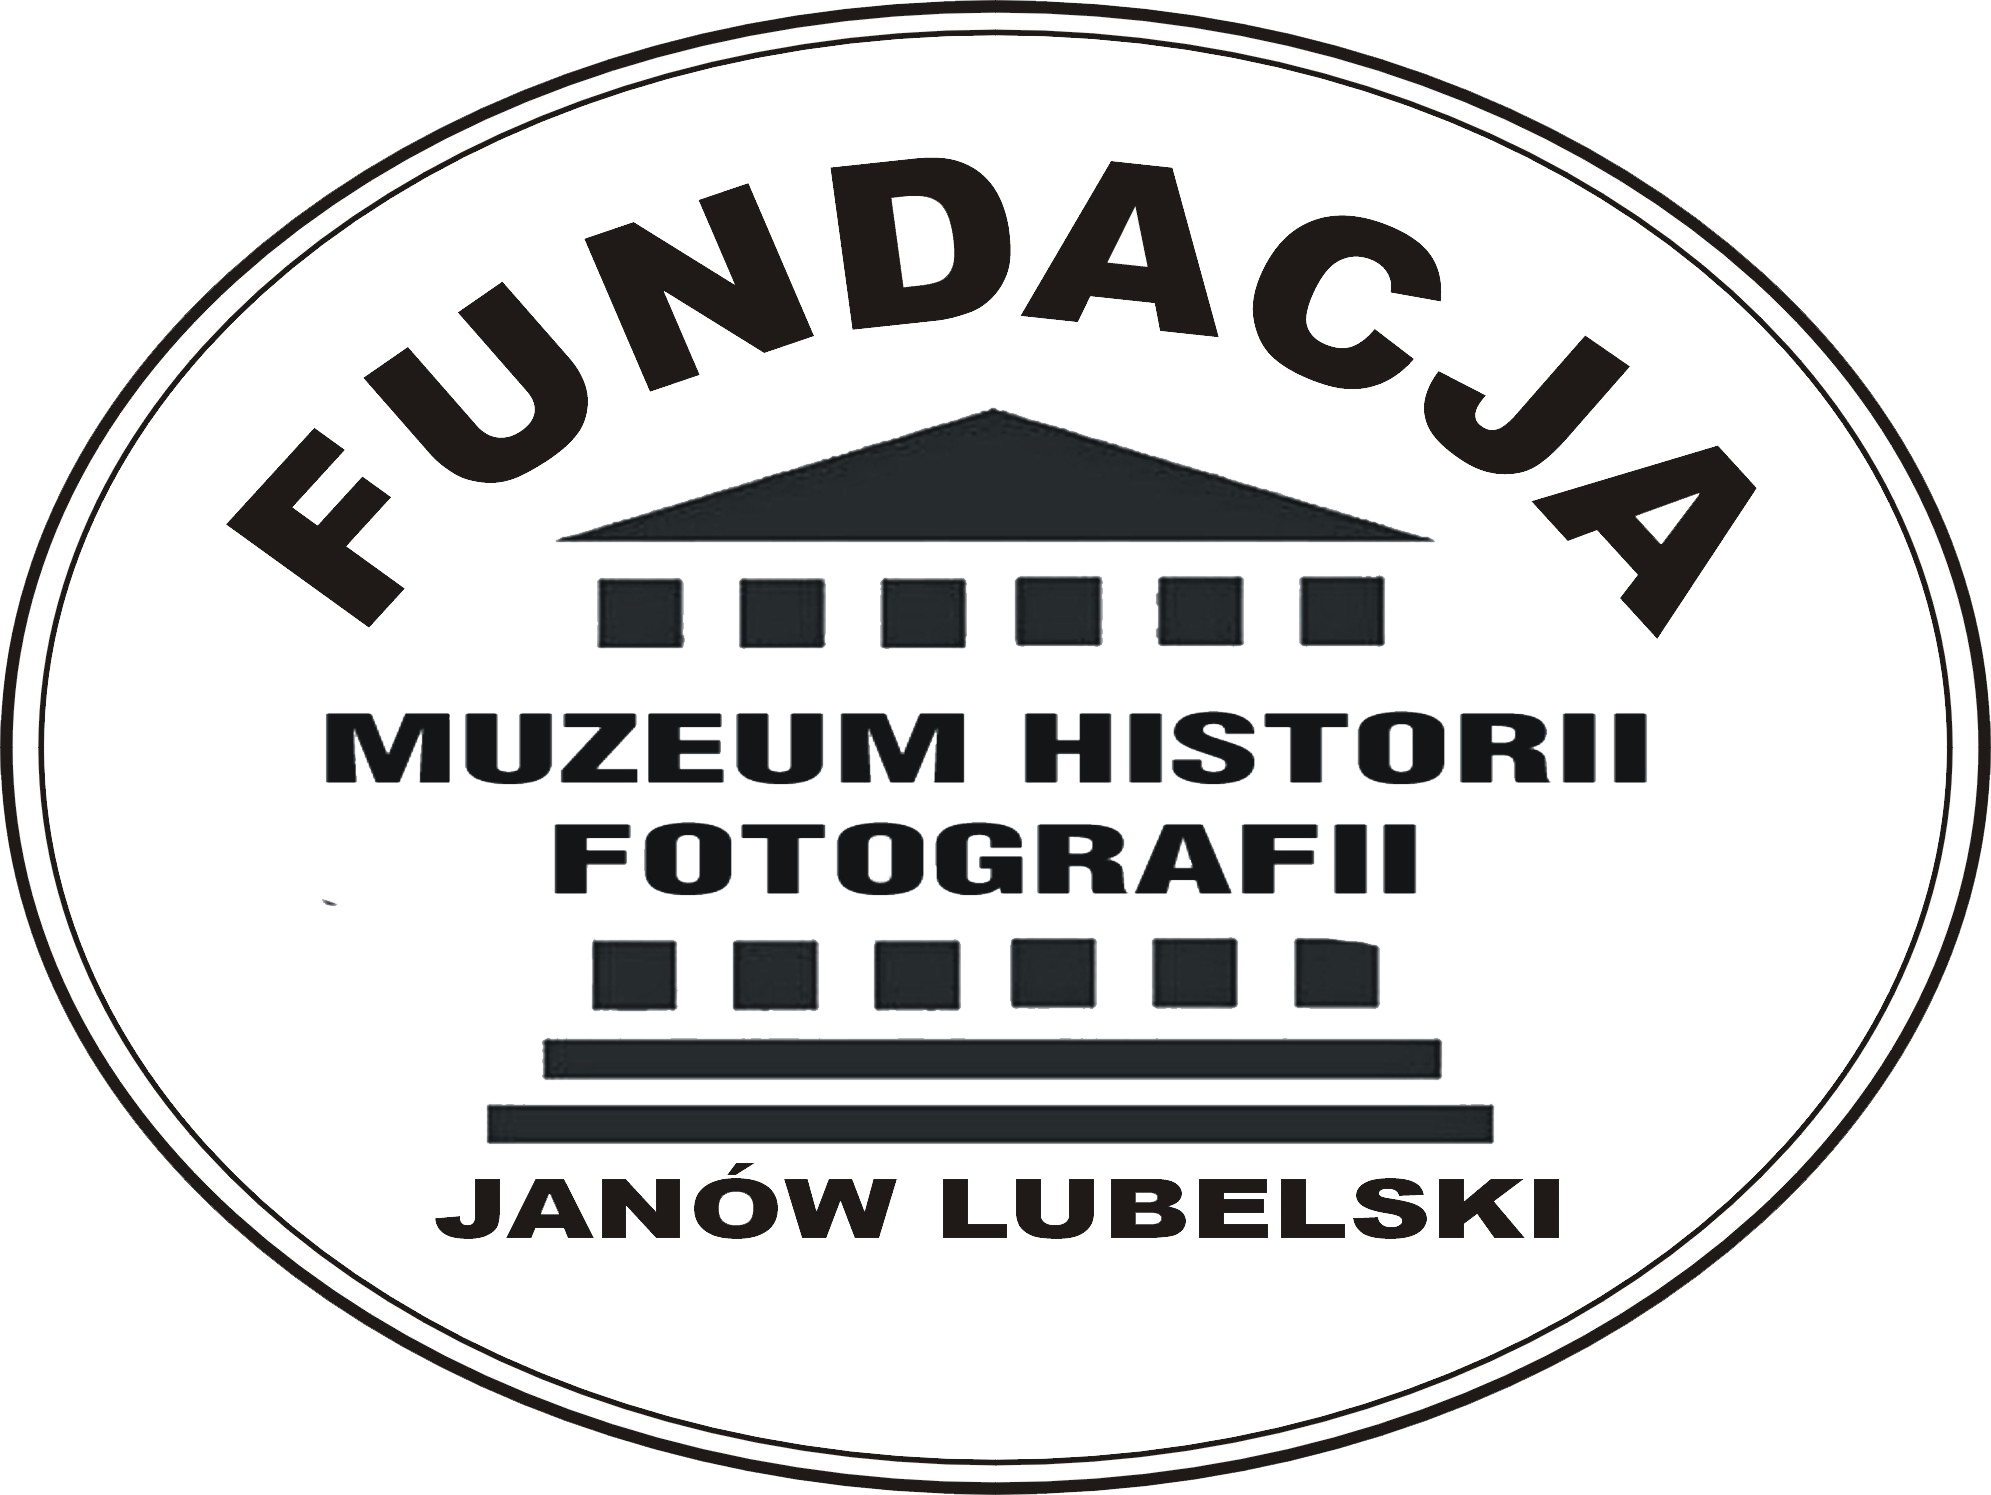 The History of Photography Museum Foundation